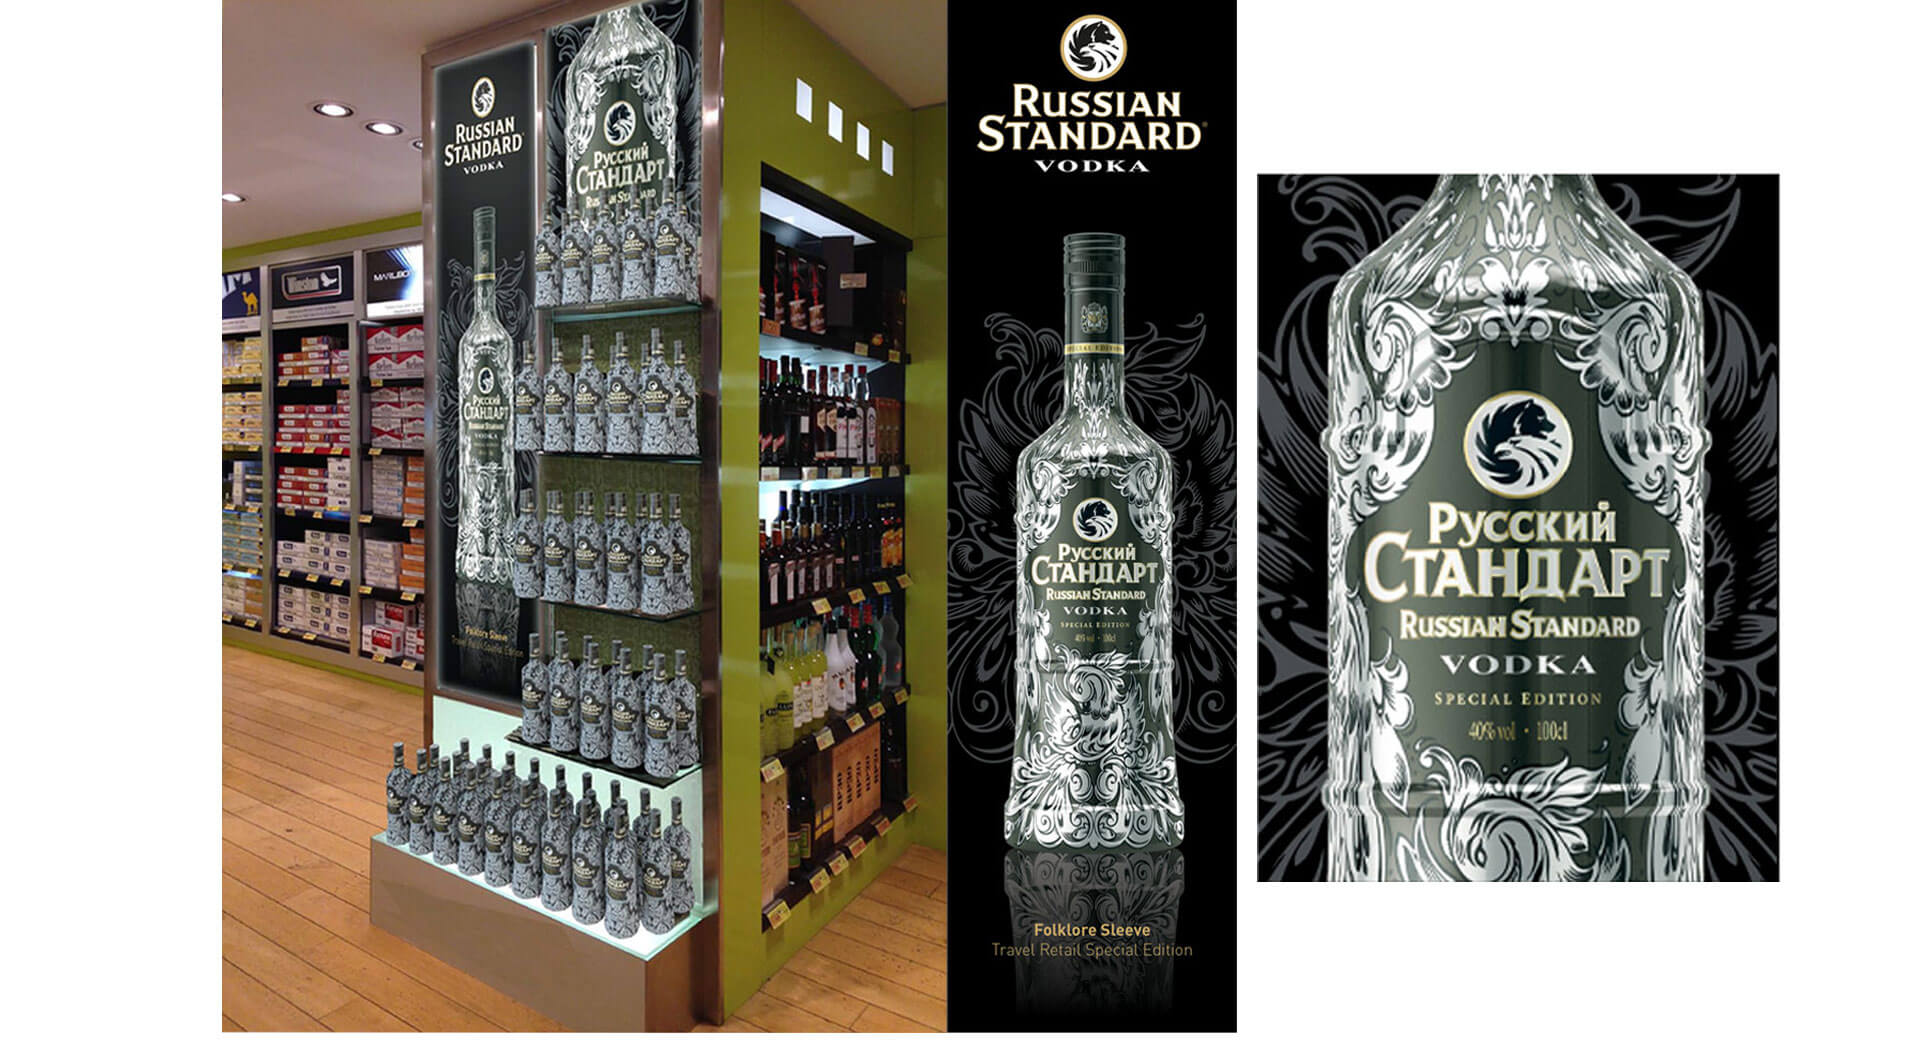 Russian Standard Vodka Folklore Fire Bird Limited Edition promotion travel retail, marketing, merchandising design, airports, duty-free alcohol